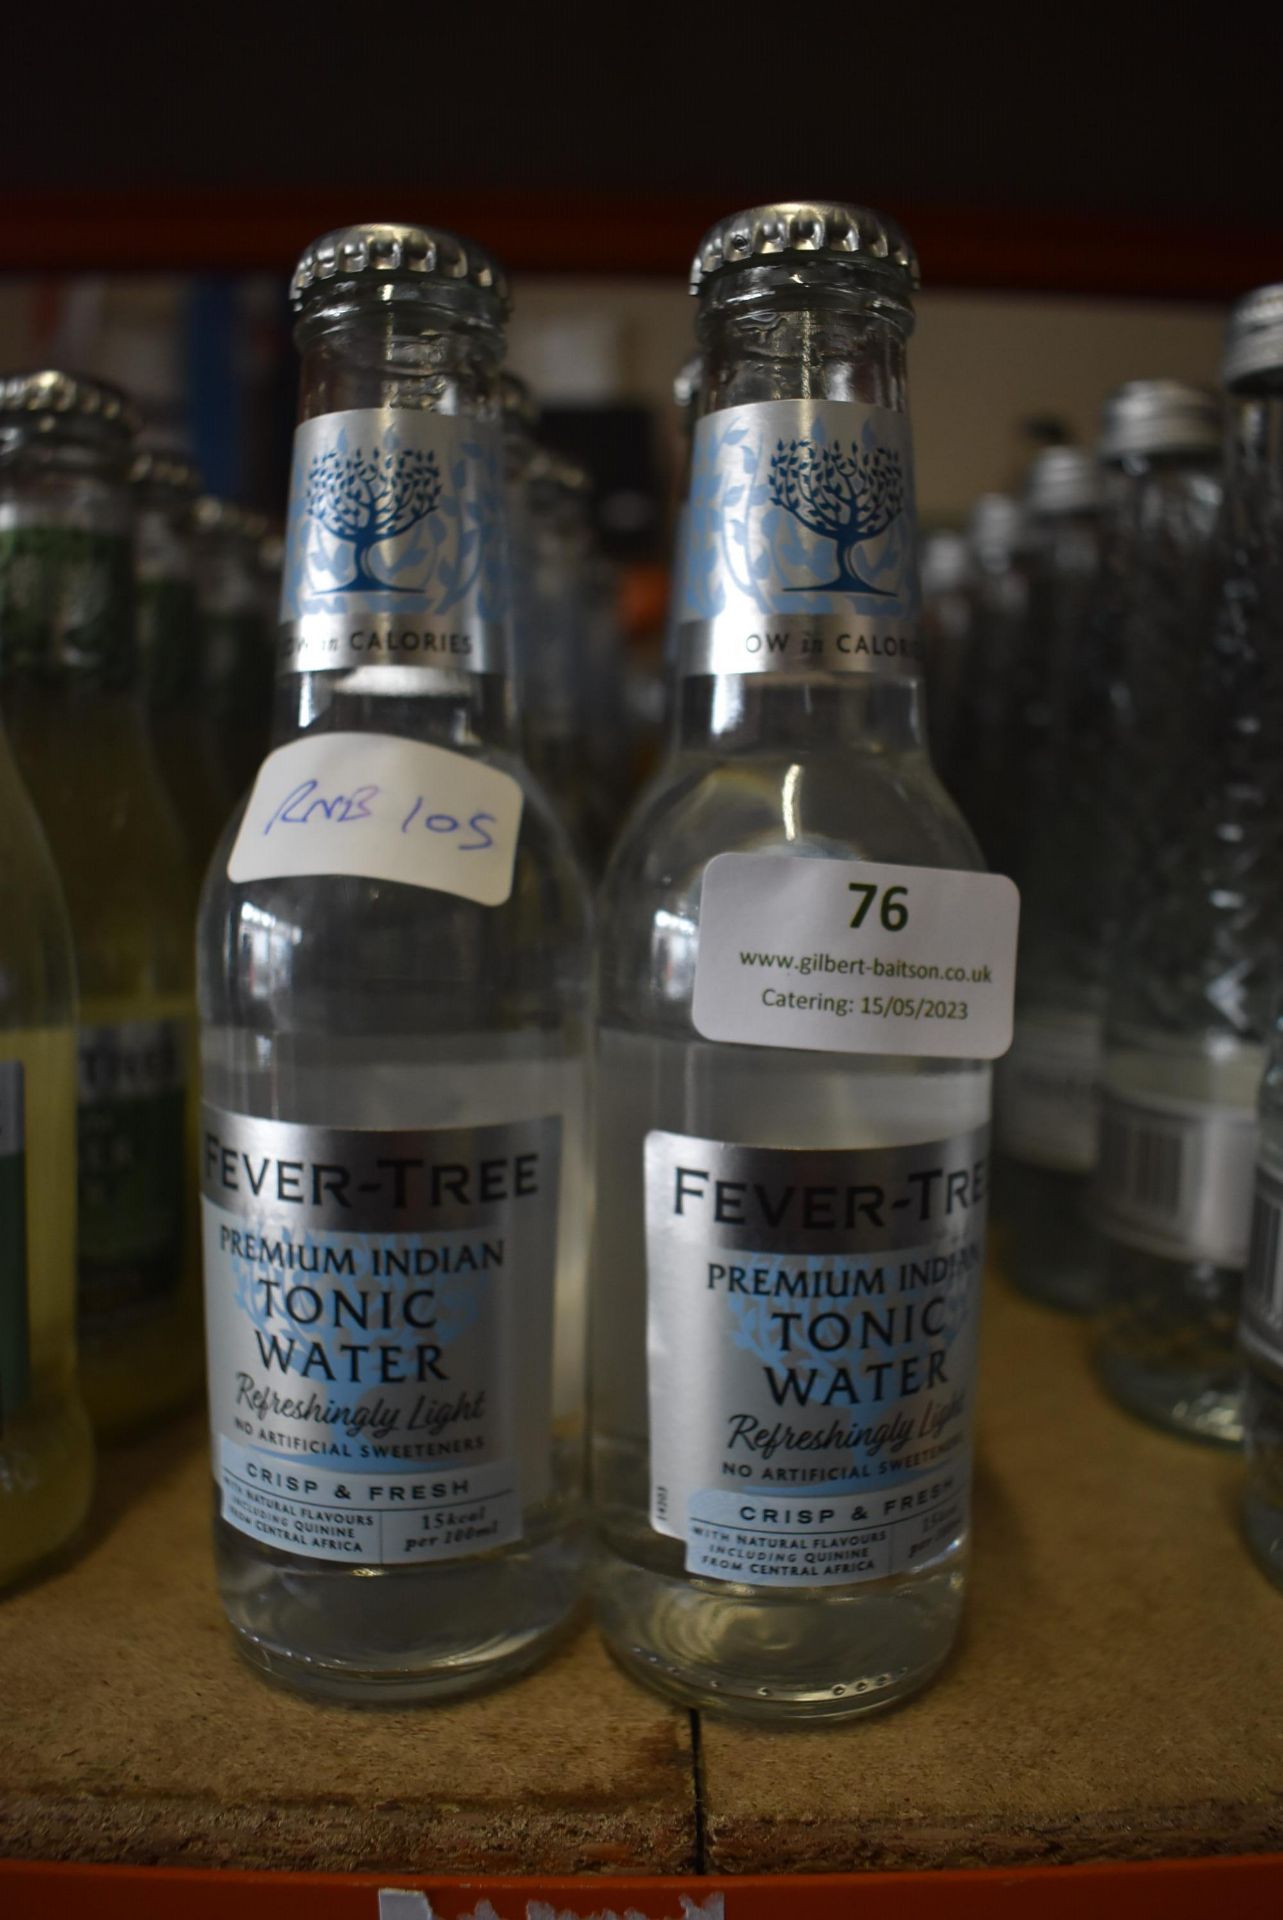 *21x 200ml Fever Tree Indian Tonic Water